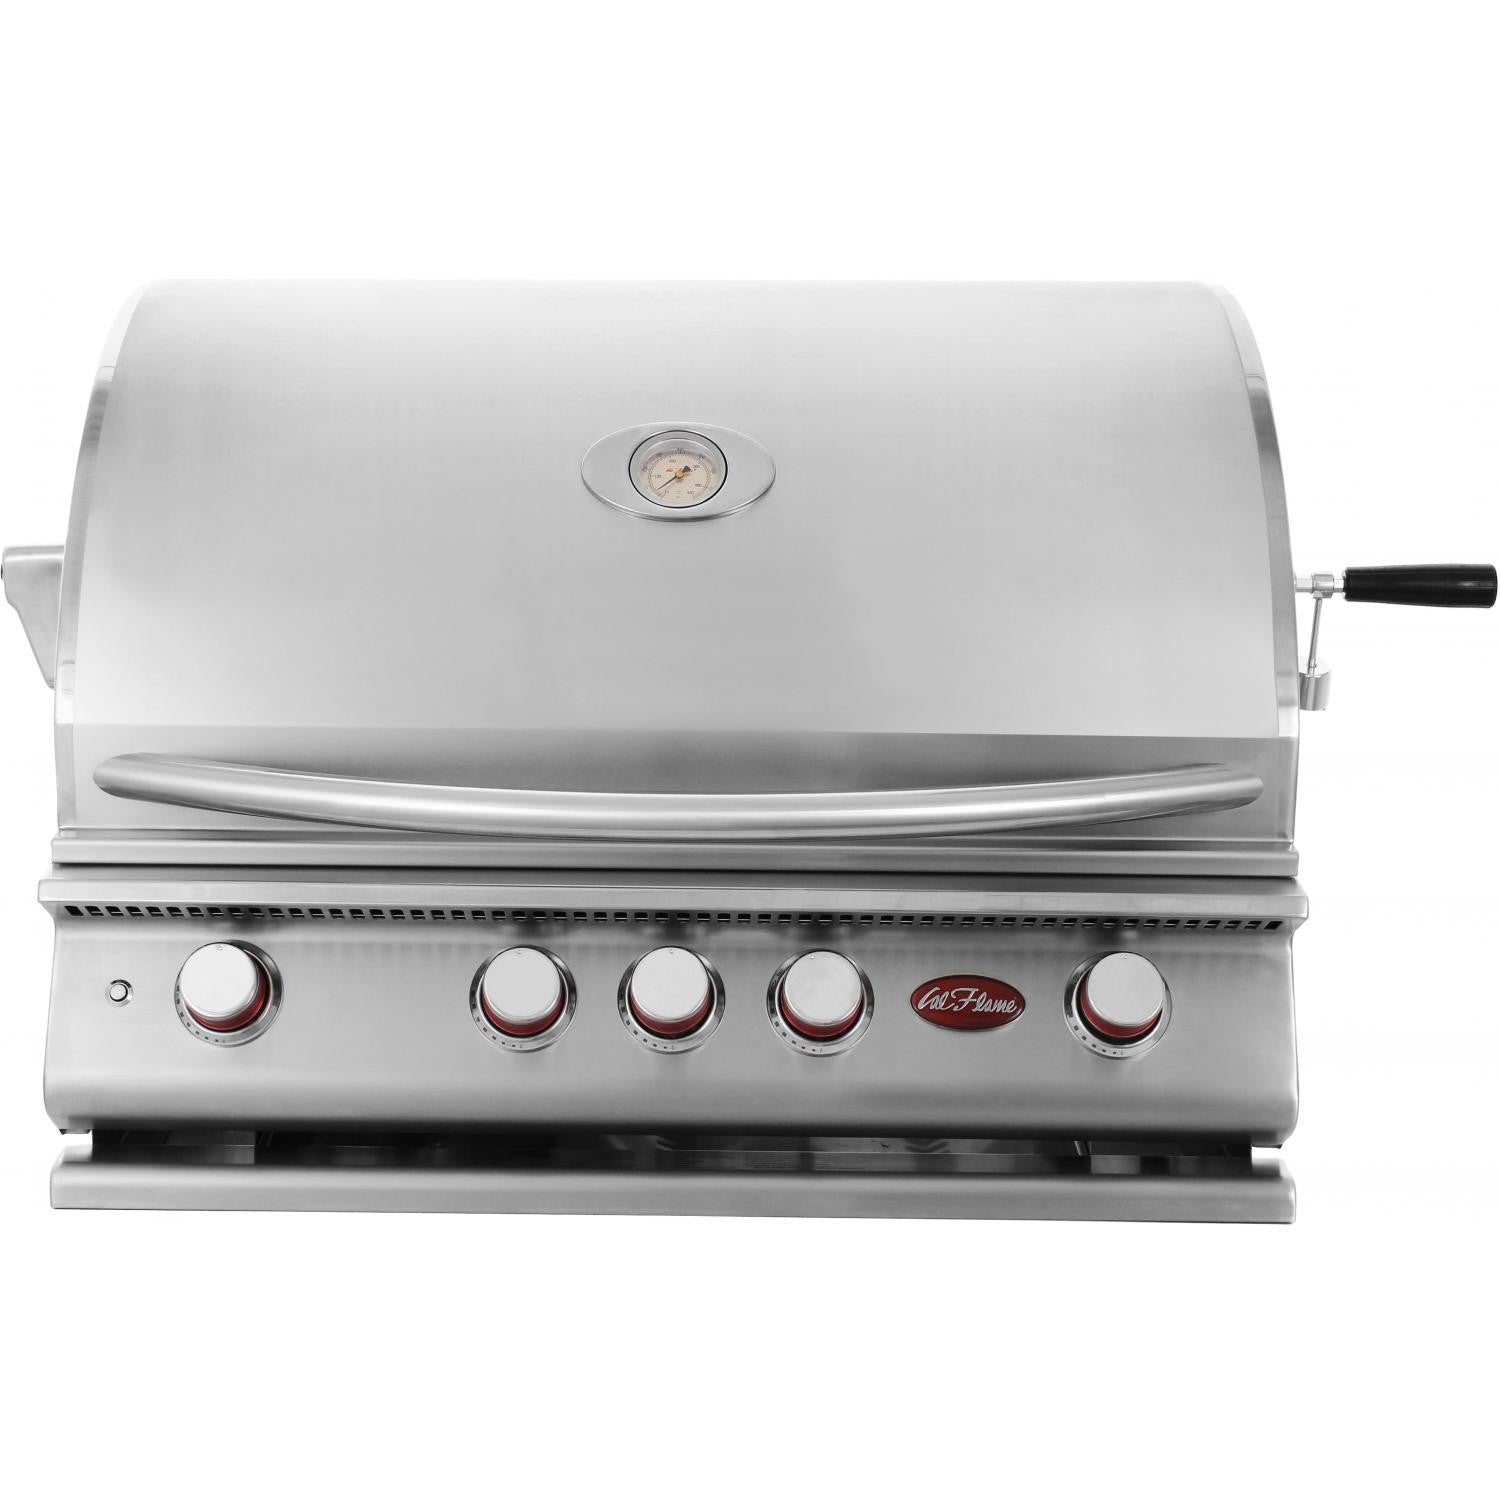 Cal FlameCal Flame 7 foot Wood Panel Grill Island with Tile Top and 4-Burner Gas Grill in Stainless Steel LBK-710-AX- BetterPatio.com